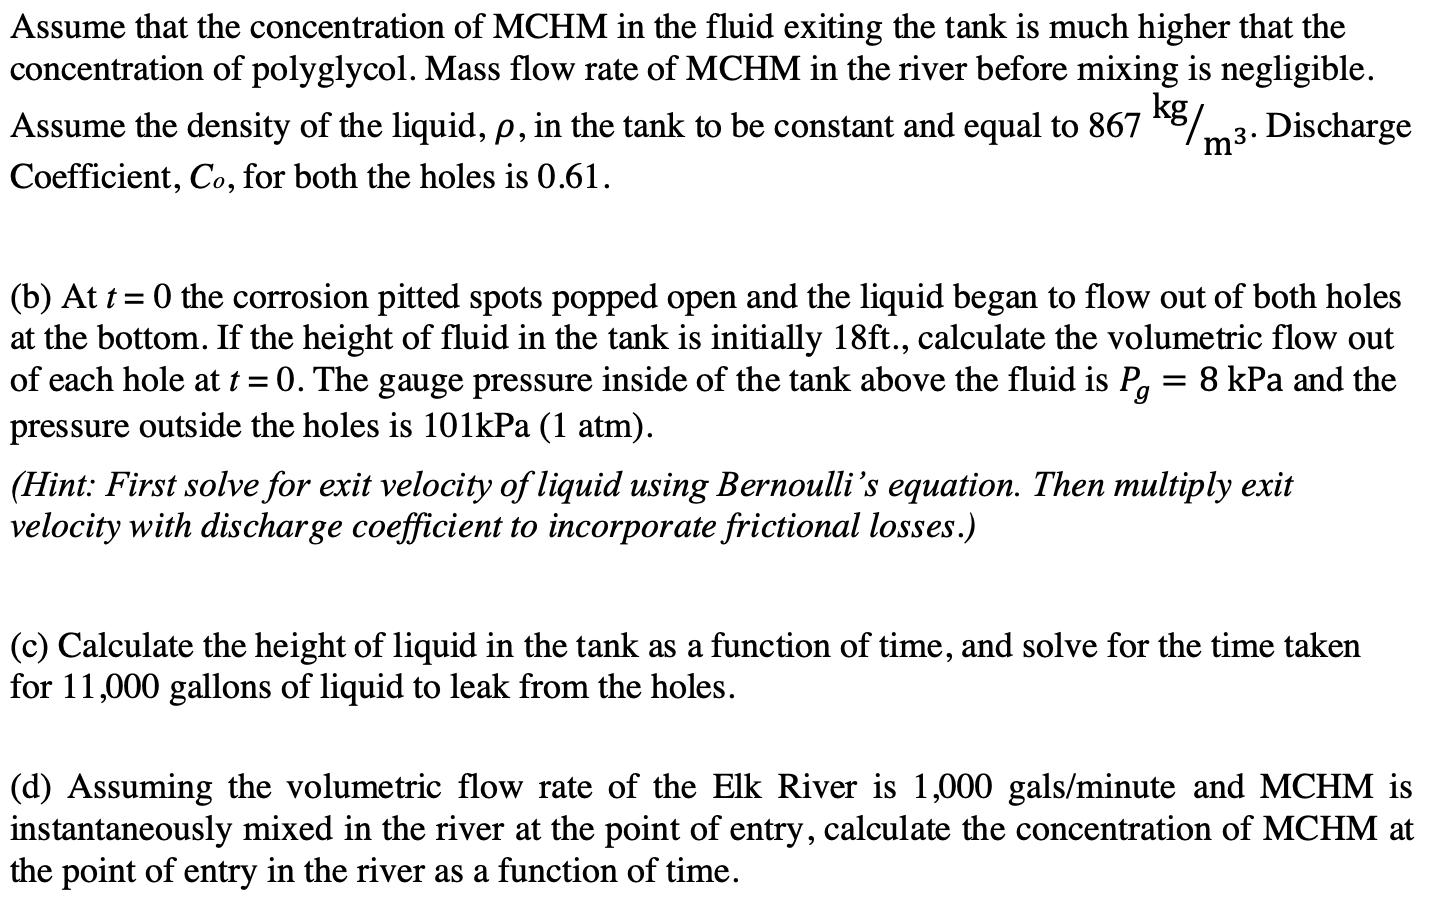 Assume that the concentration of MCHM in the fluid exiting the tank is much higher that the concentration of polyglycol. Mass